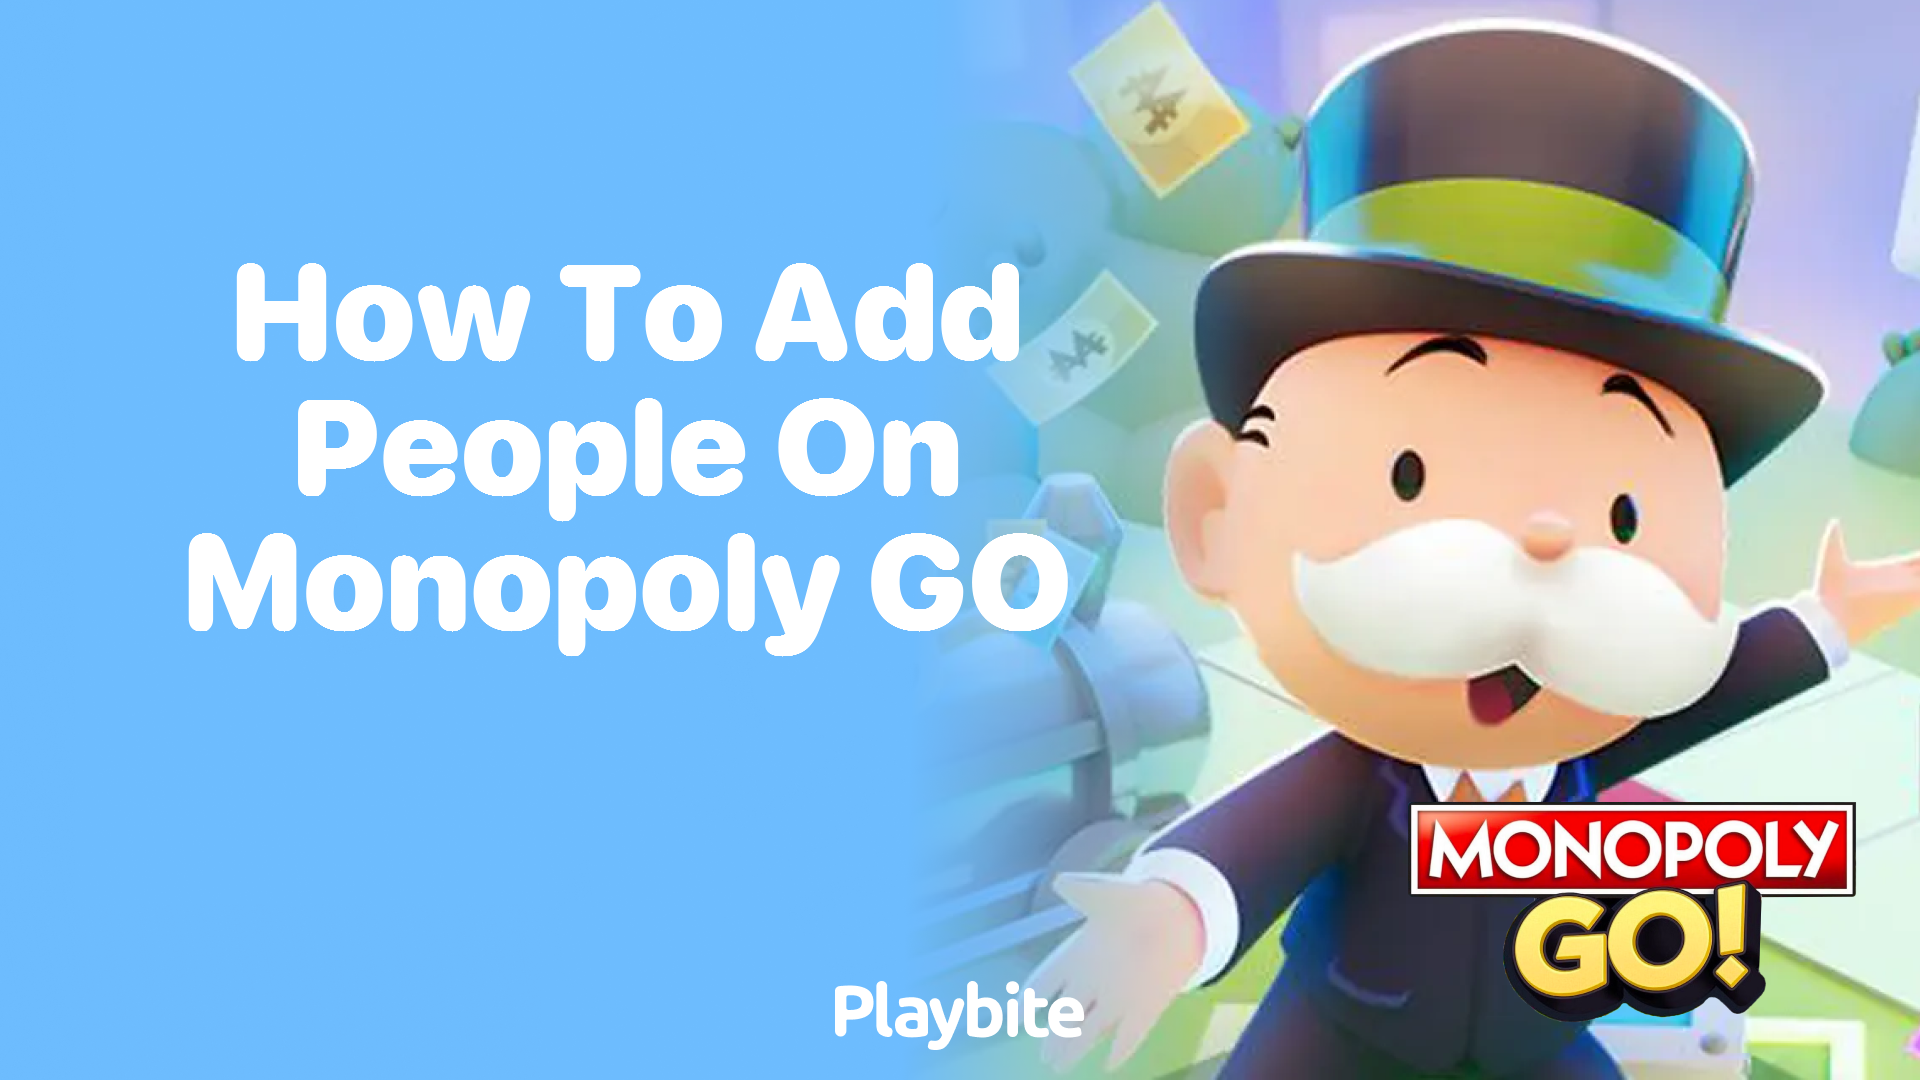 How To Add People On Monopoly GO!